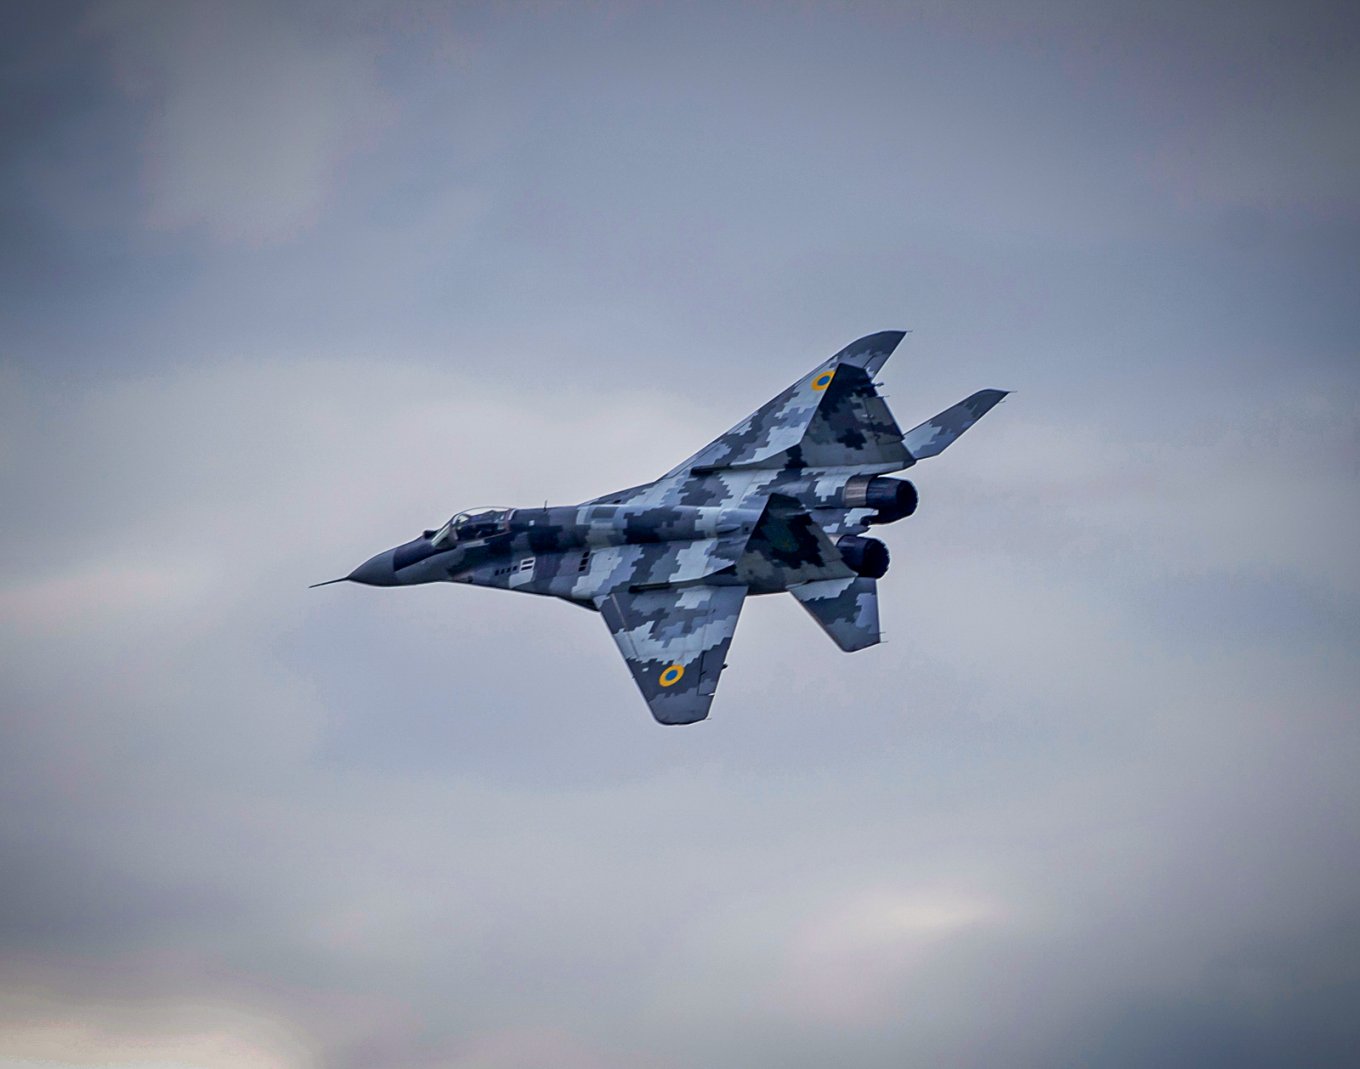 MiG-29 fighter of the Air Force of Ukraine